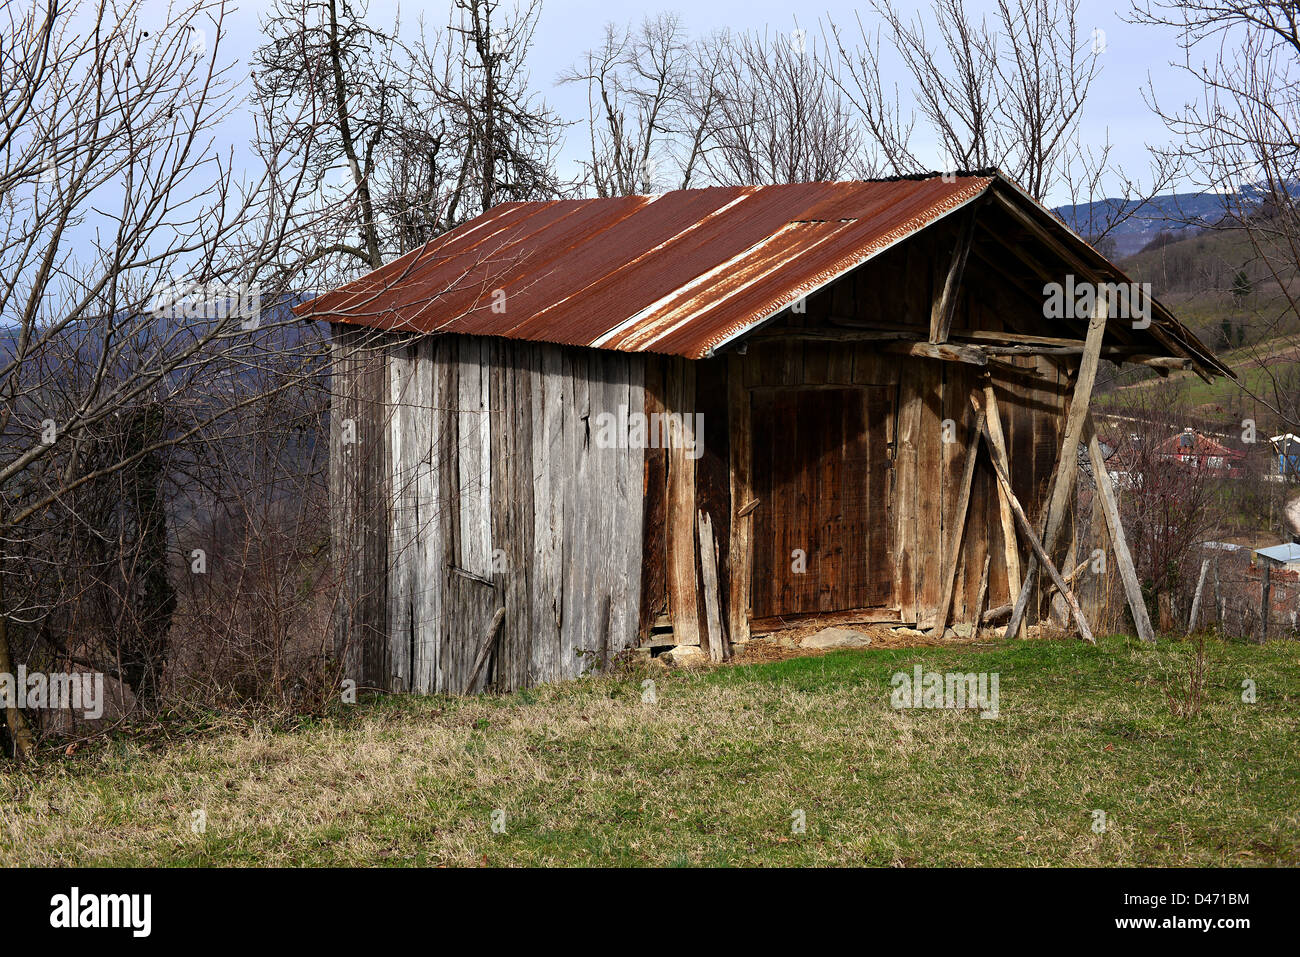 abandoned wooden hut in rural areas Stock Photo